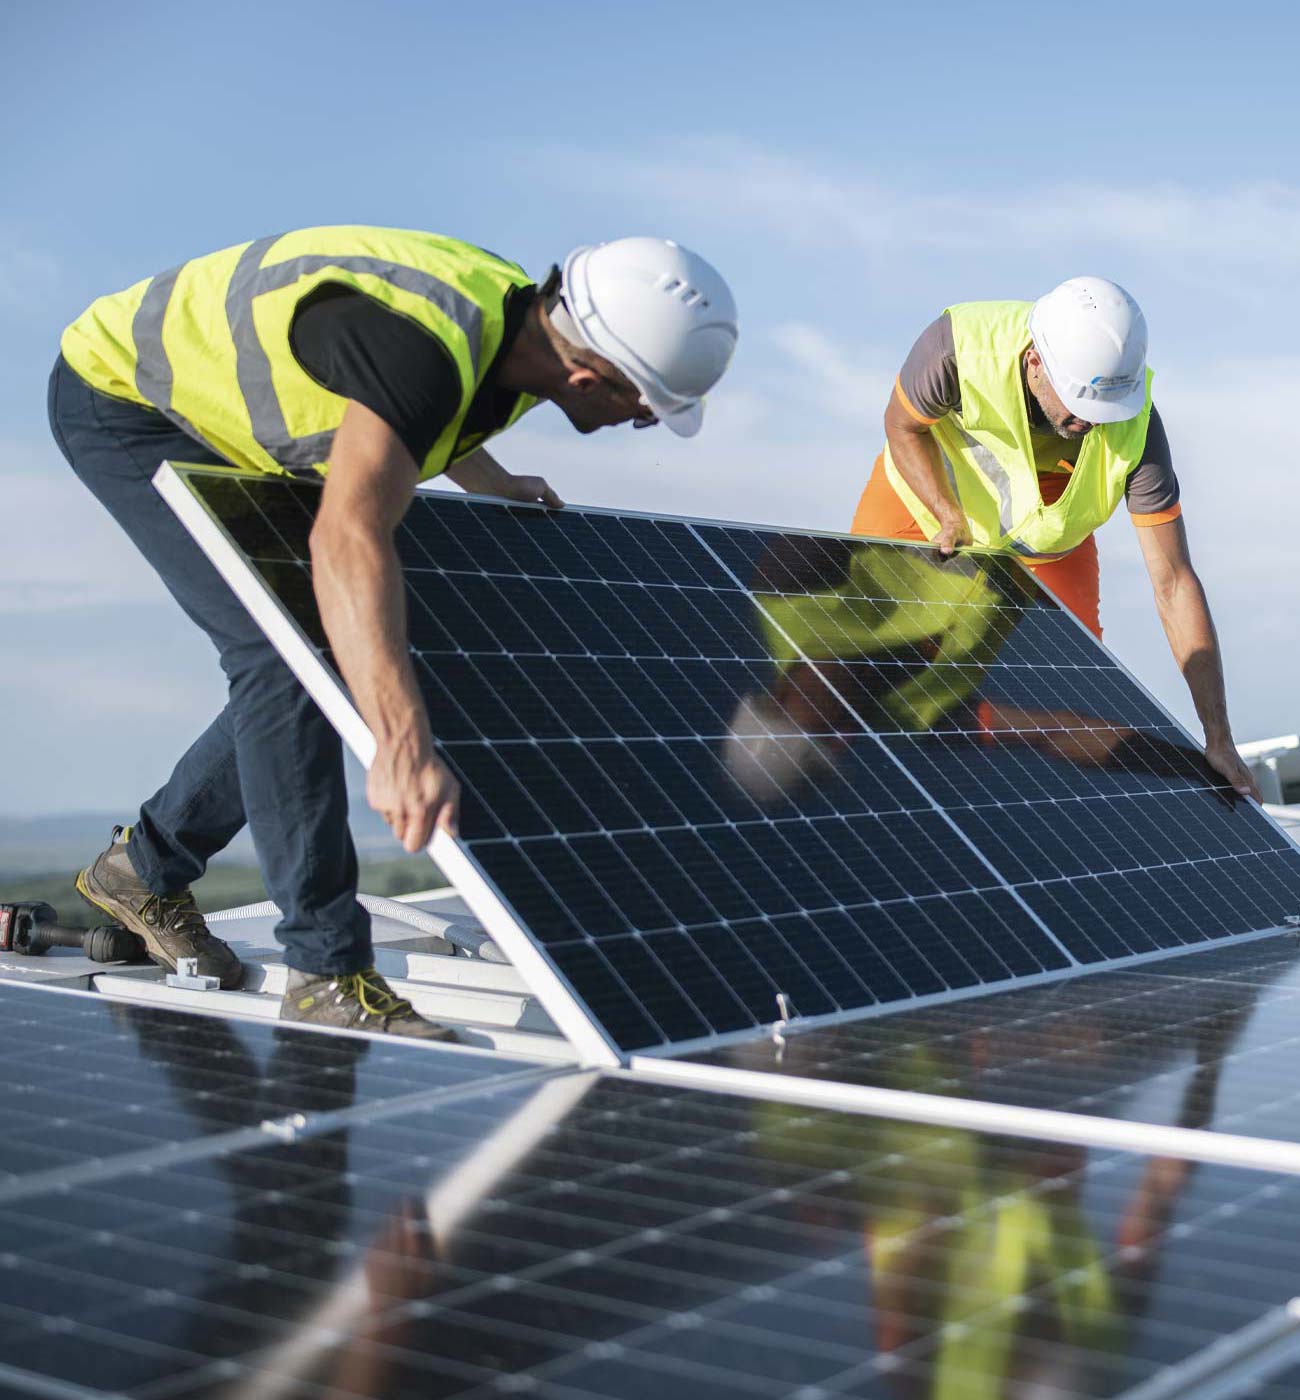 Two Electra FM workers set up a solar panel on a roof